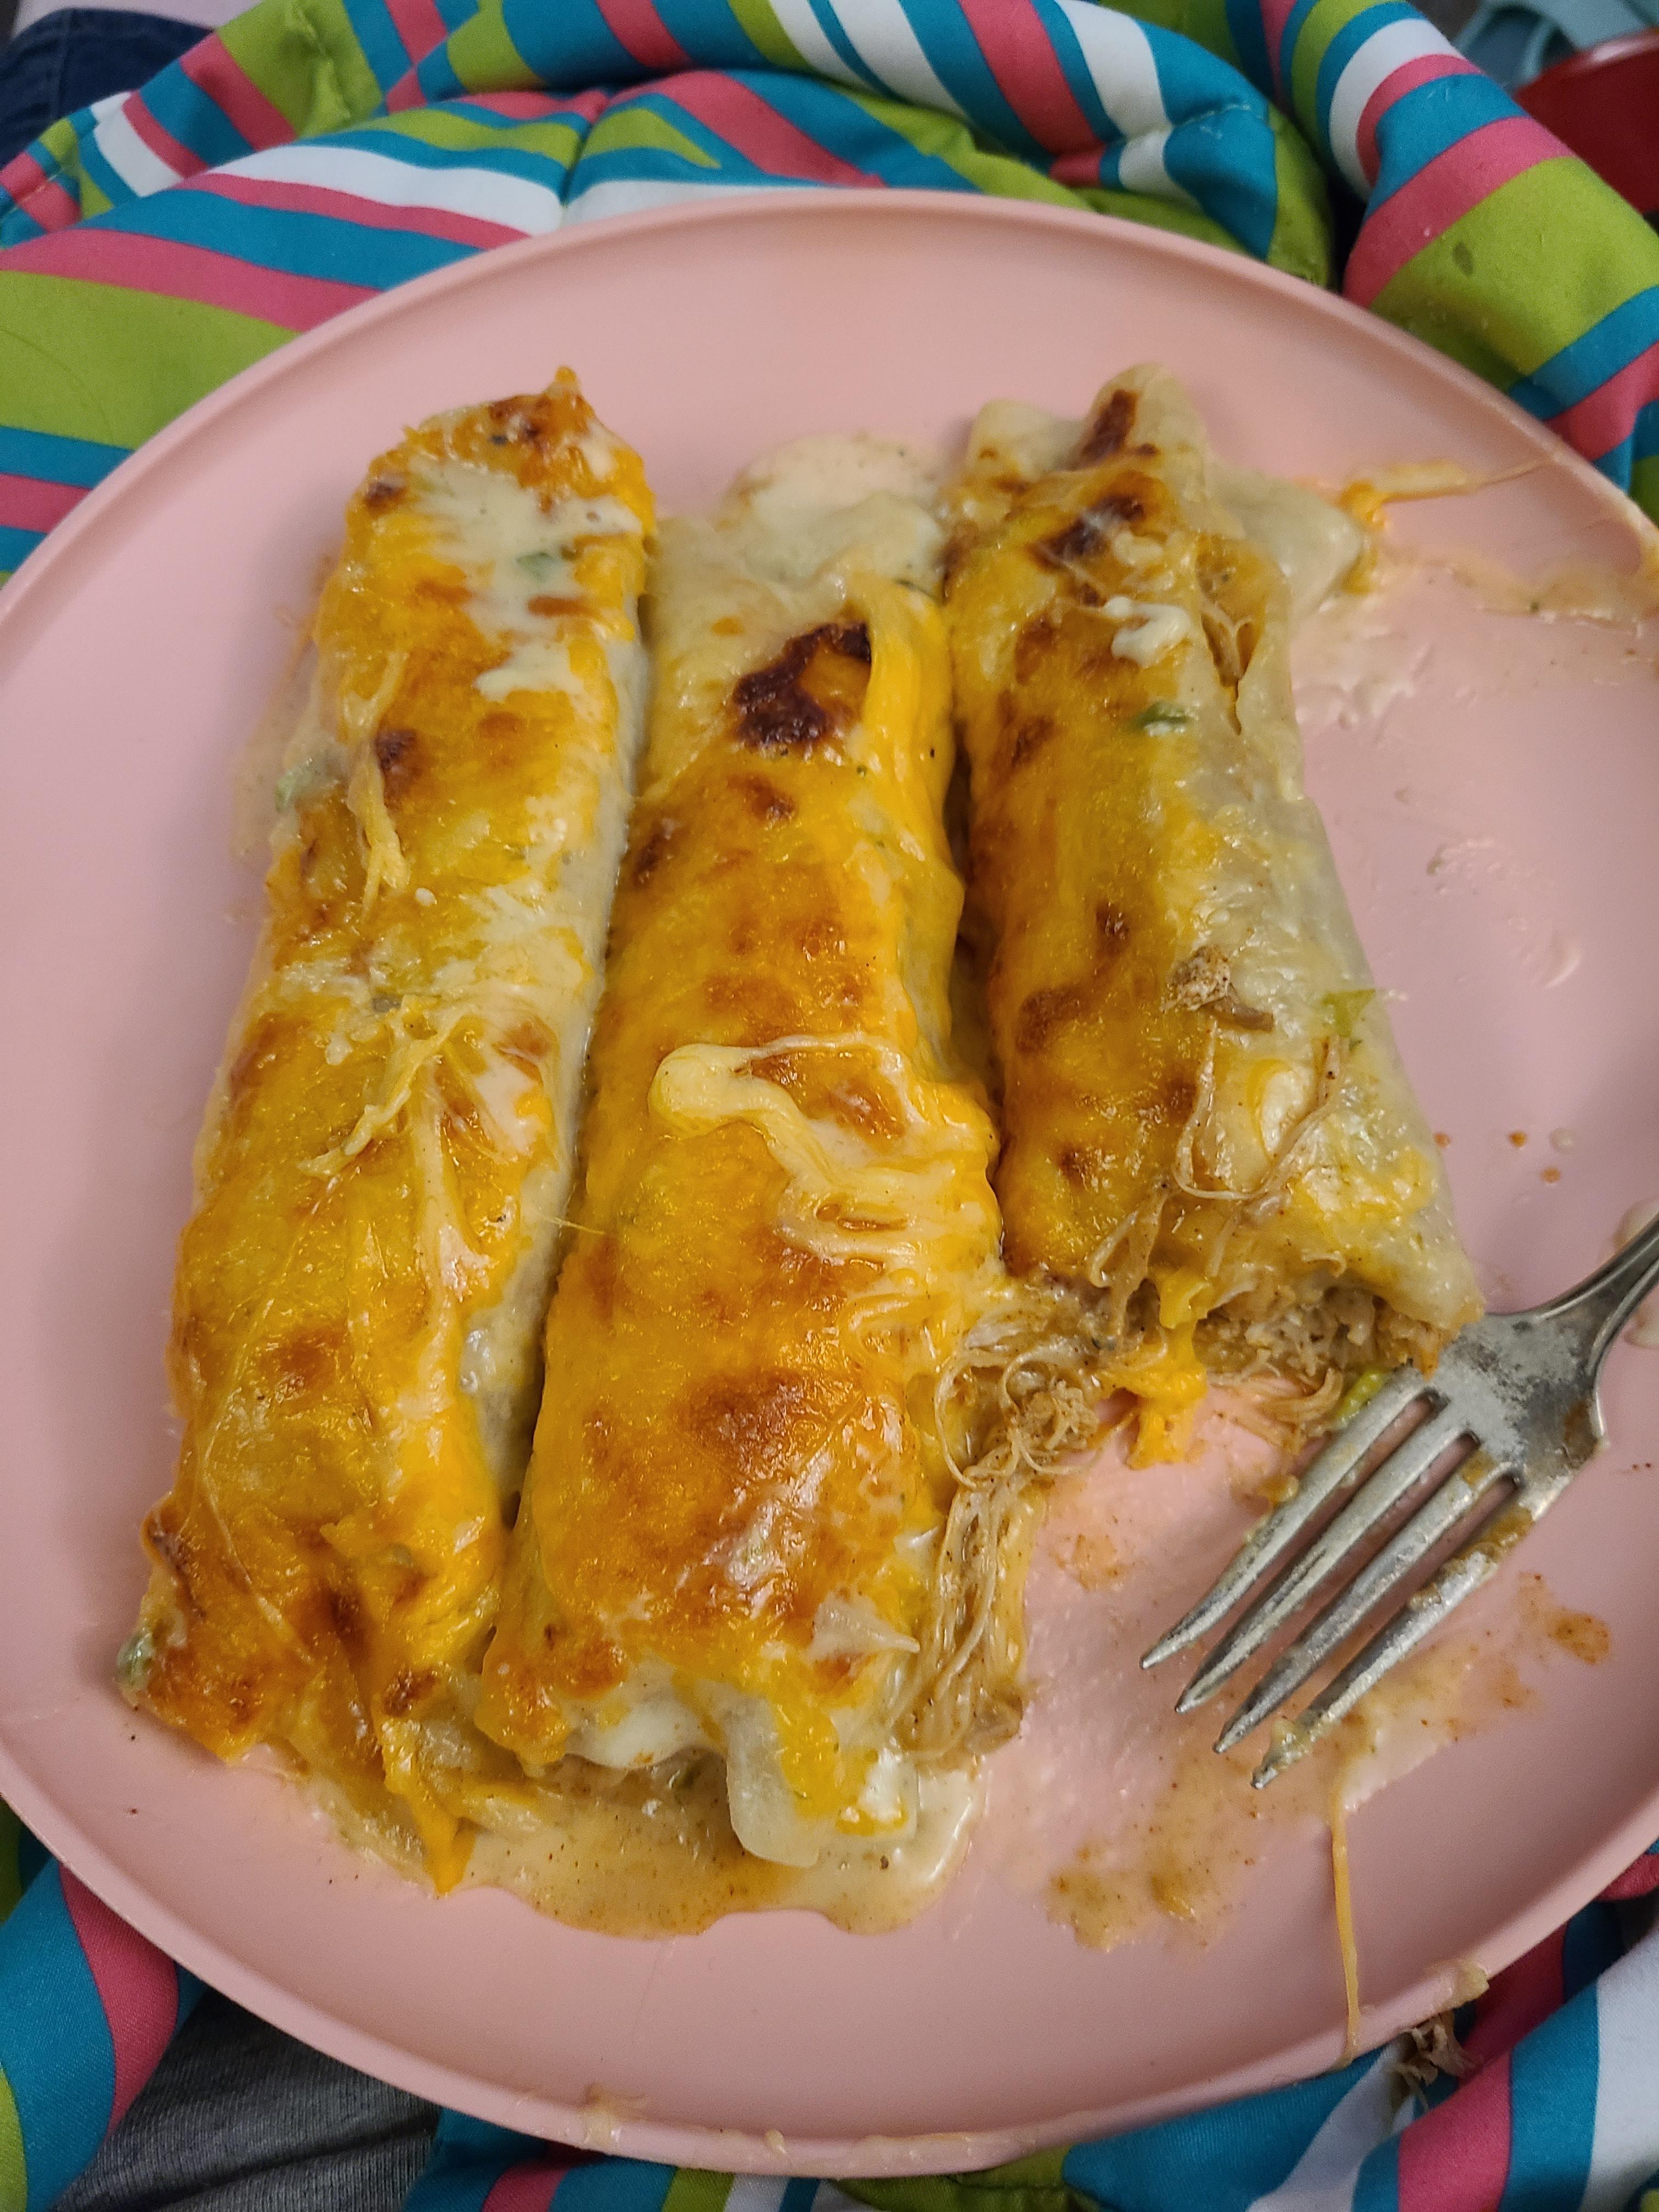 Three cheese enchiladas on a pink plate with a fork